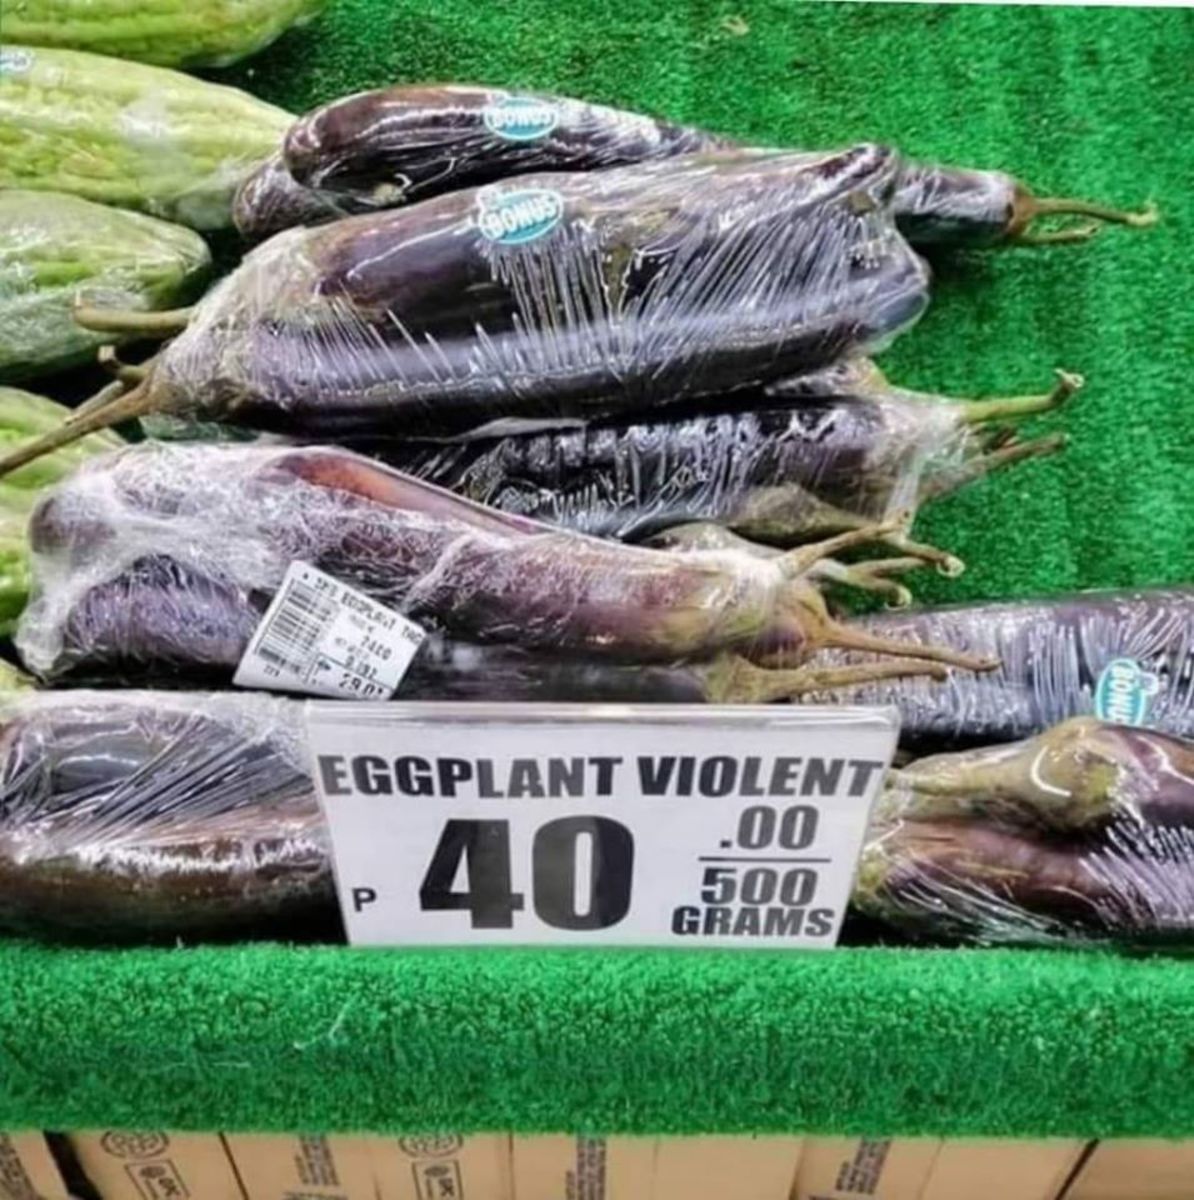 Beware of these violet eggplants – they have anger management issues.